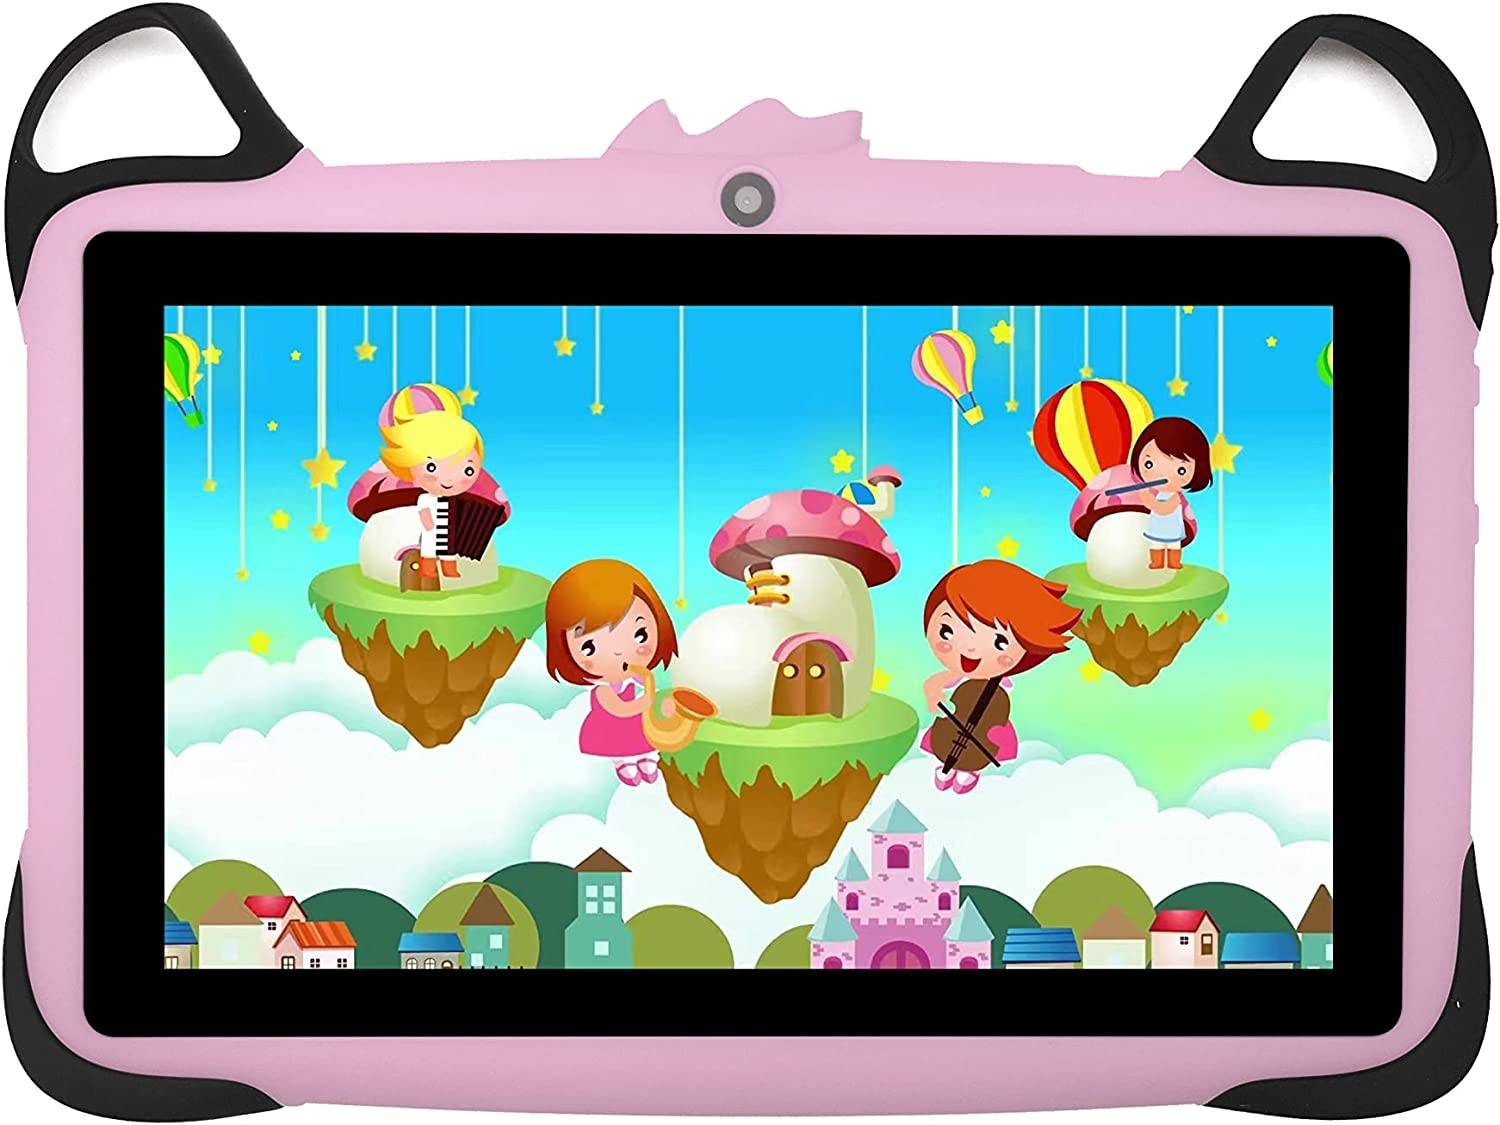 WinTouch Educational and Entertainment Tablet Shockproof Bluetooth Wi-Fi 7 inches 1/8 GB Atari Game Gifts + Screen+ Cover - Pink